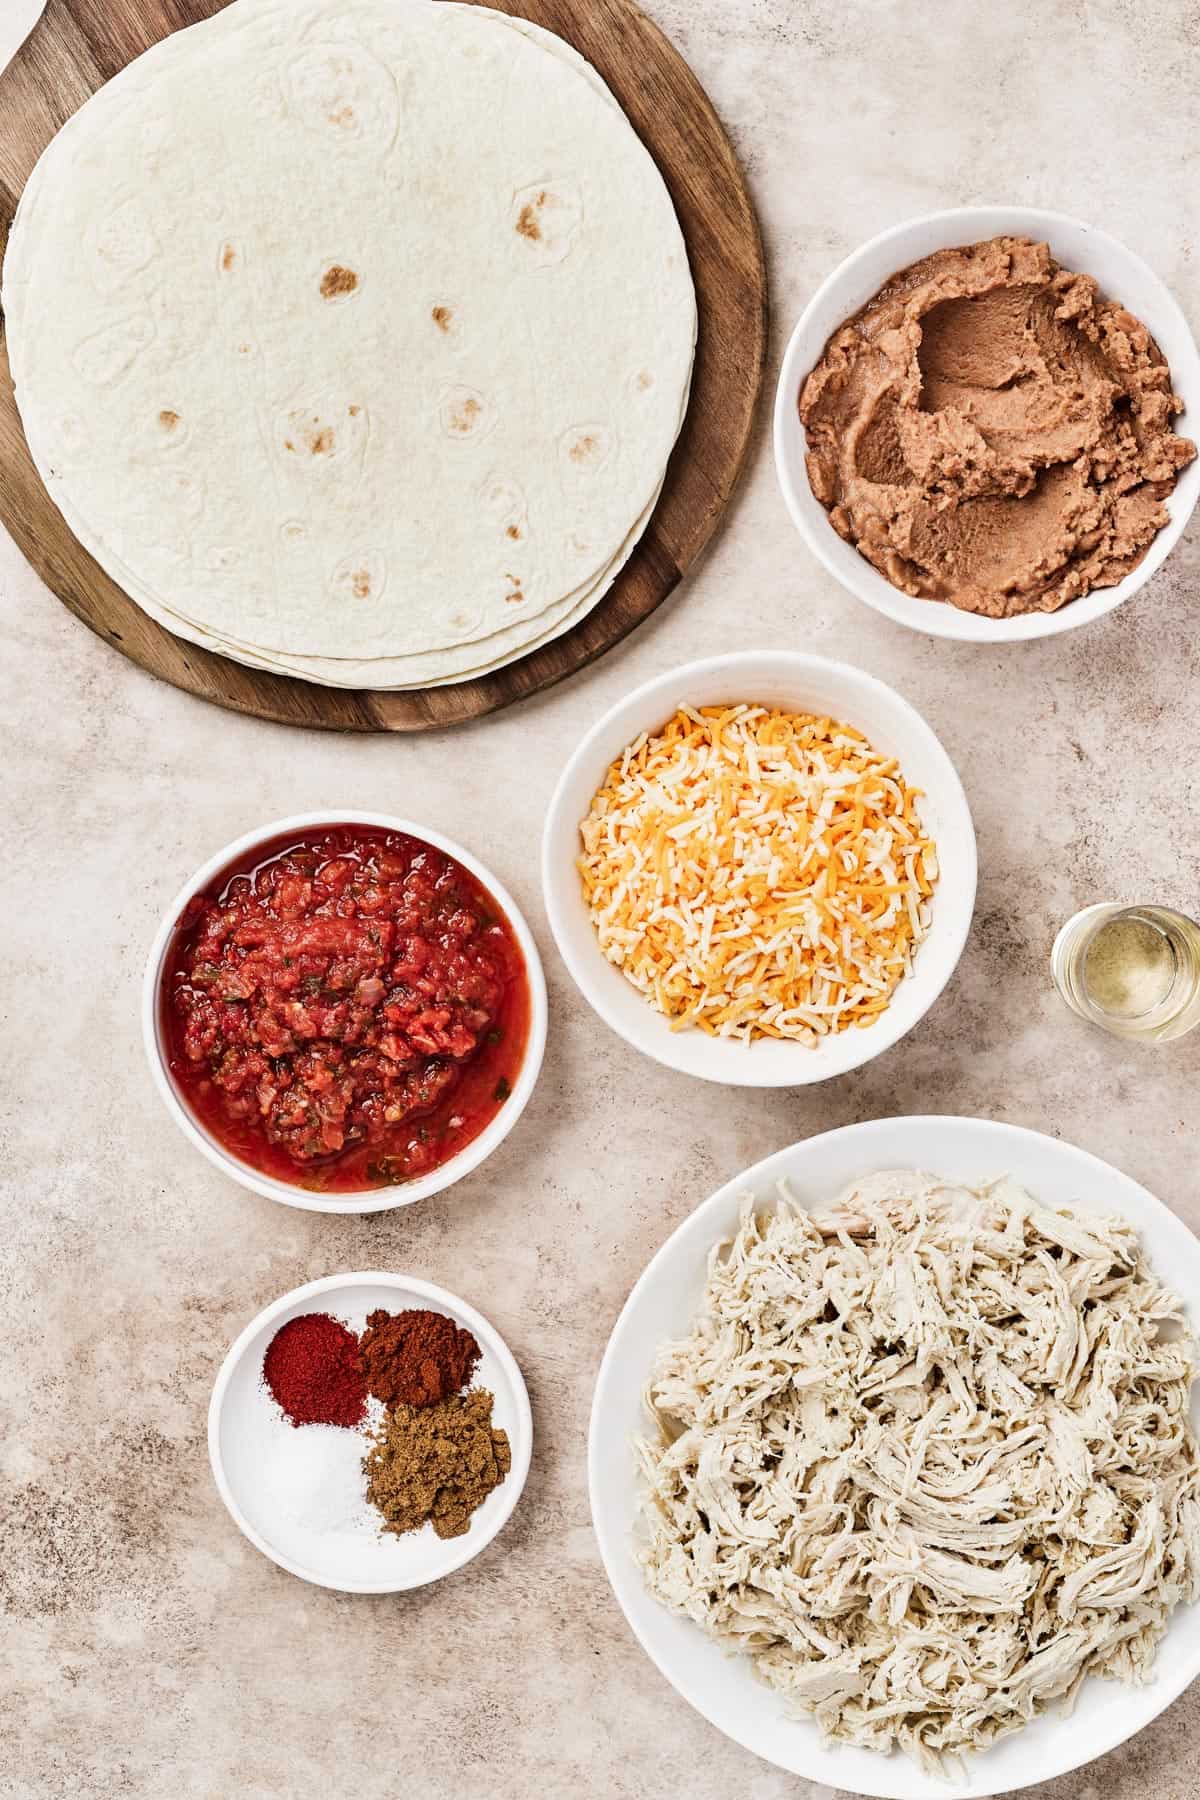 From top left: Tortillas, refried beans, salsa, shredded cheese, oil, spices, shredded chicken.